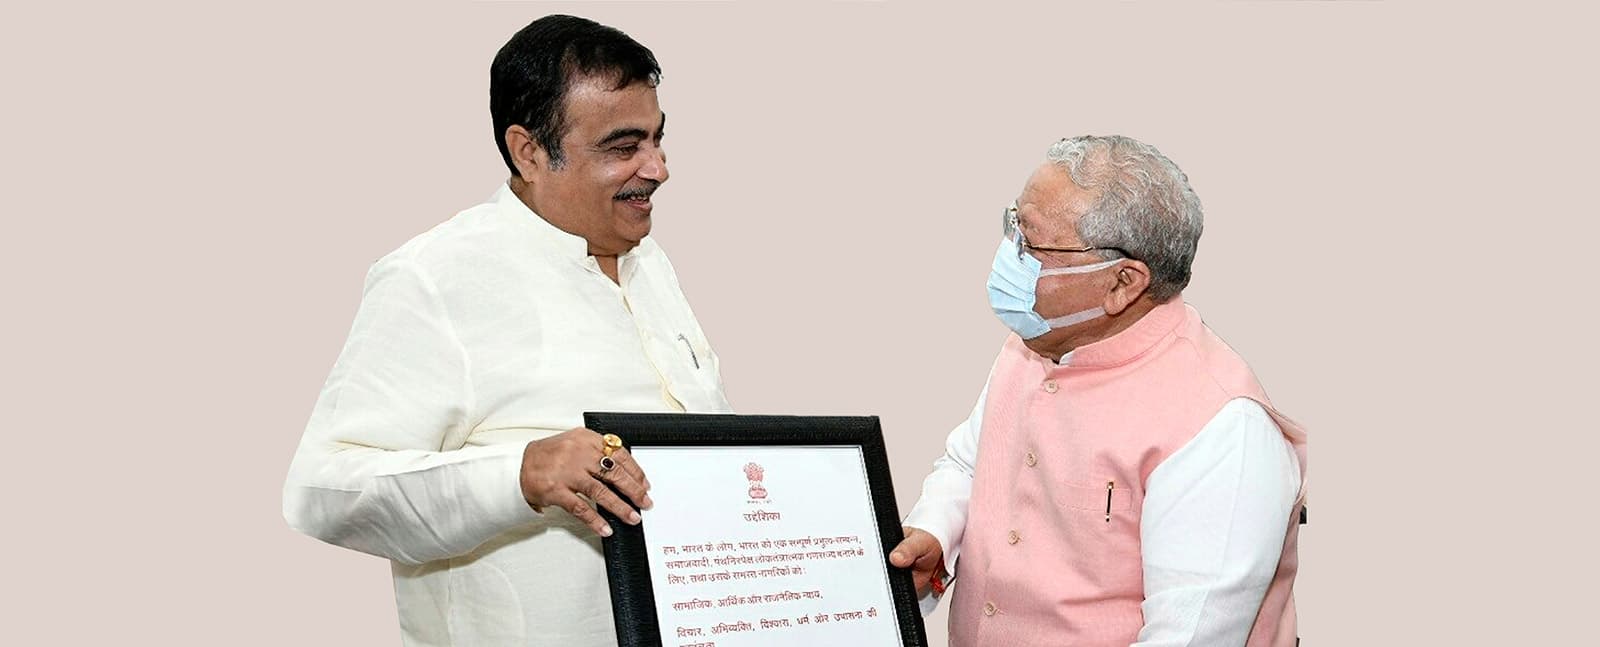 Hon'ble Governor meets Shri Nitin Gadkari Hon'ble Minister of Road Transport & Highways, Government of India  at New Delhi